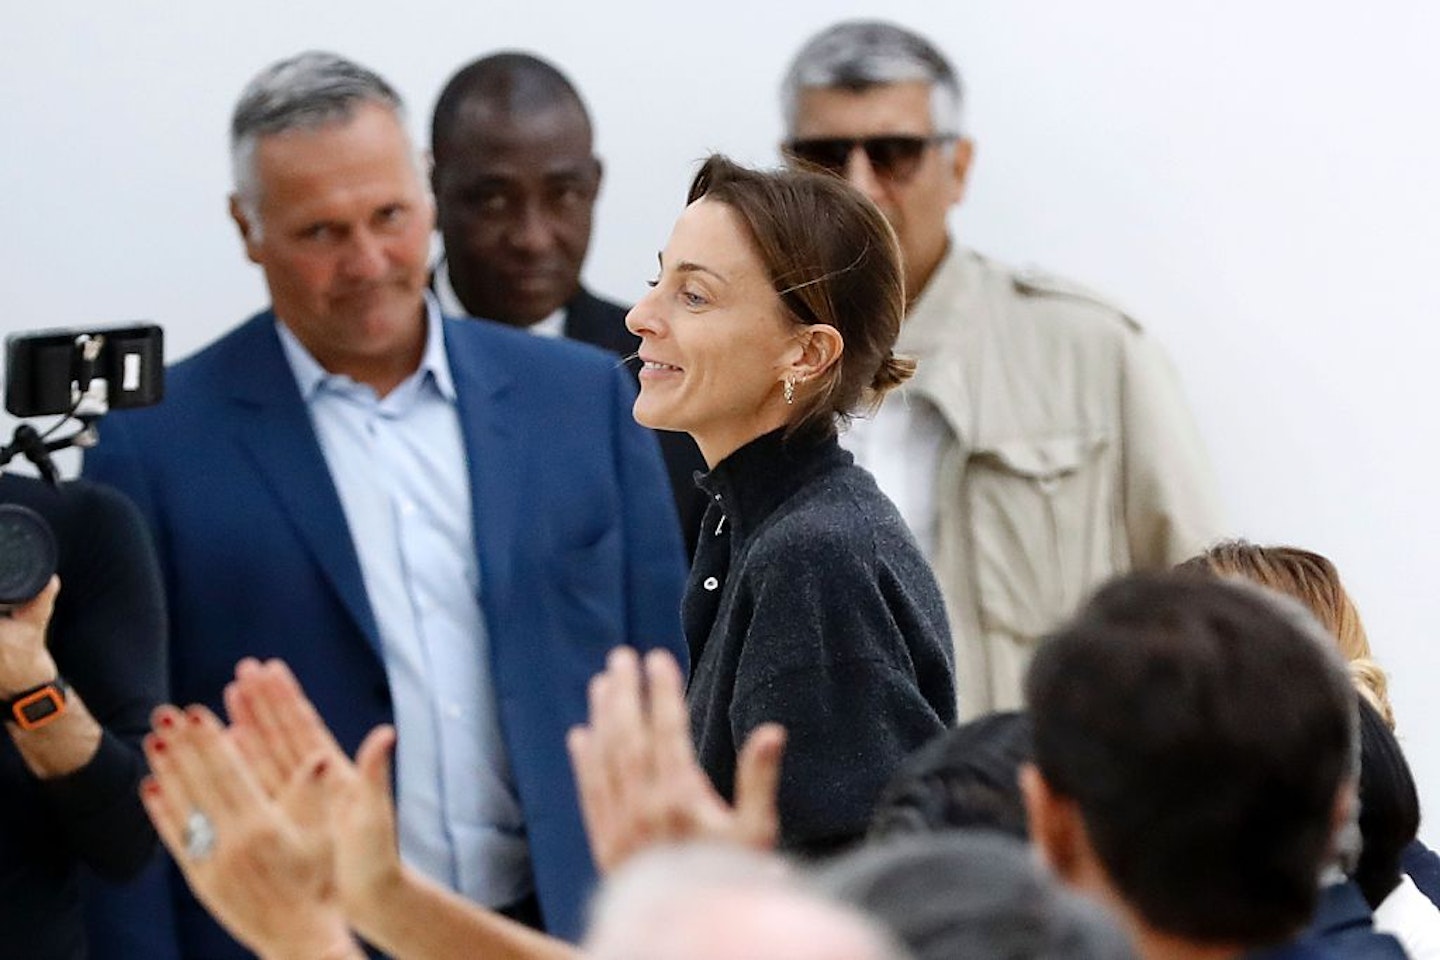 Phoebe Philo has made the 'mum necklace' cool again (but it's not cheap)